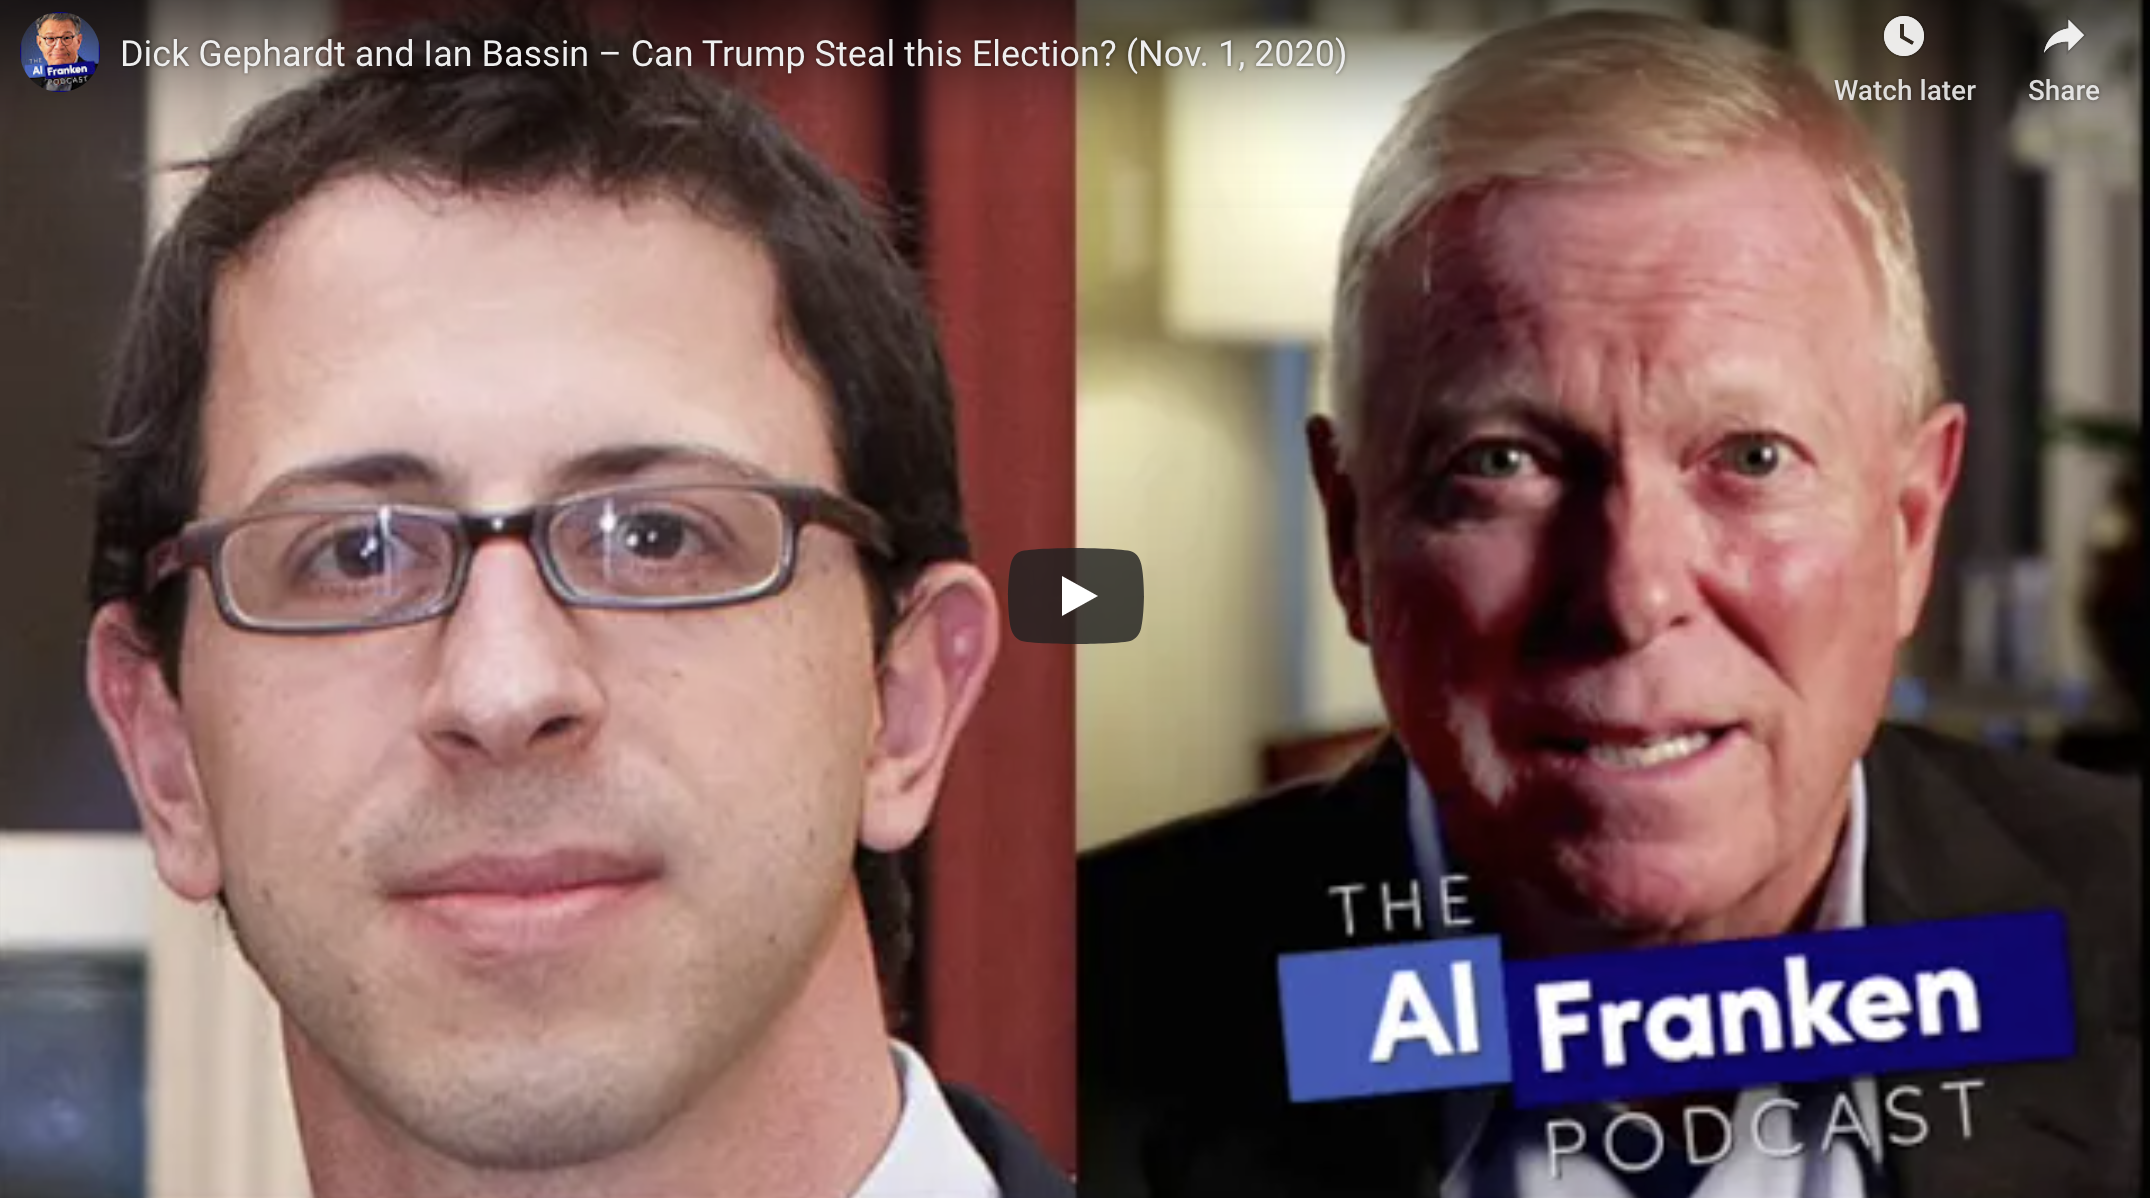 The Al Franken Podcast: Dick Gephardt and Ian Bassin – Can Trump Steal this Election?